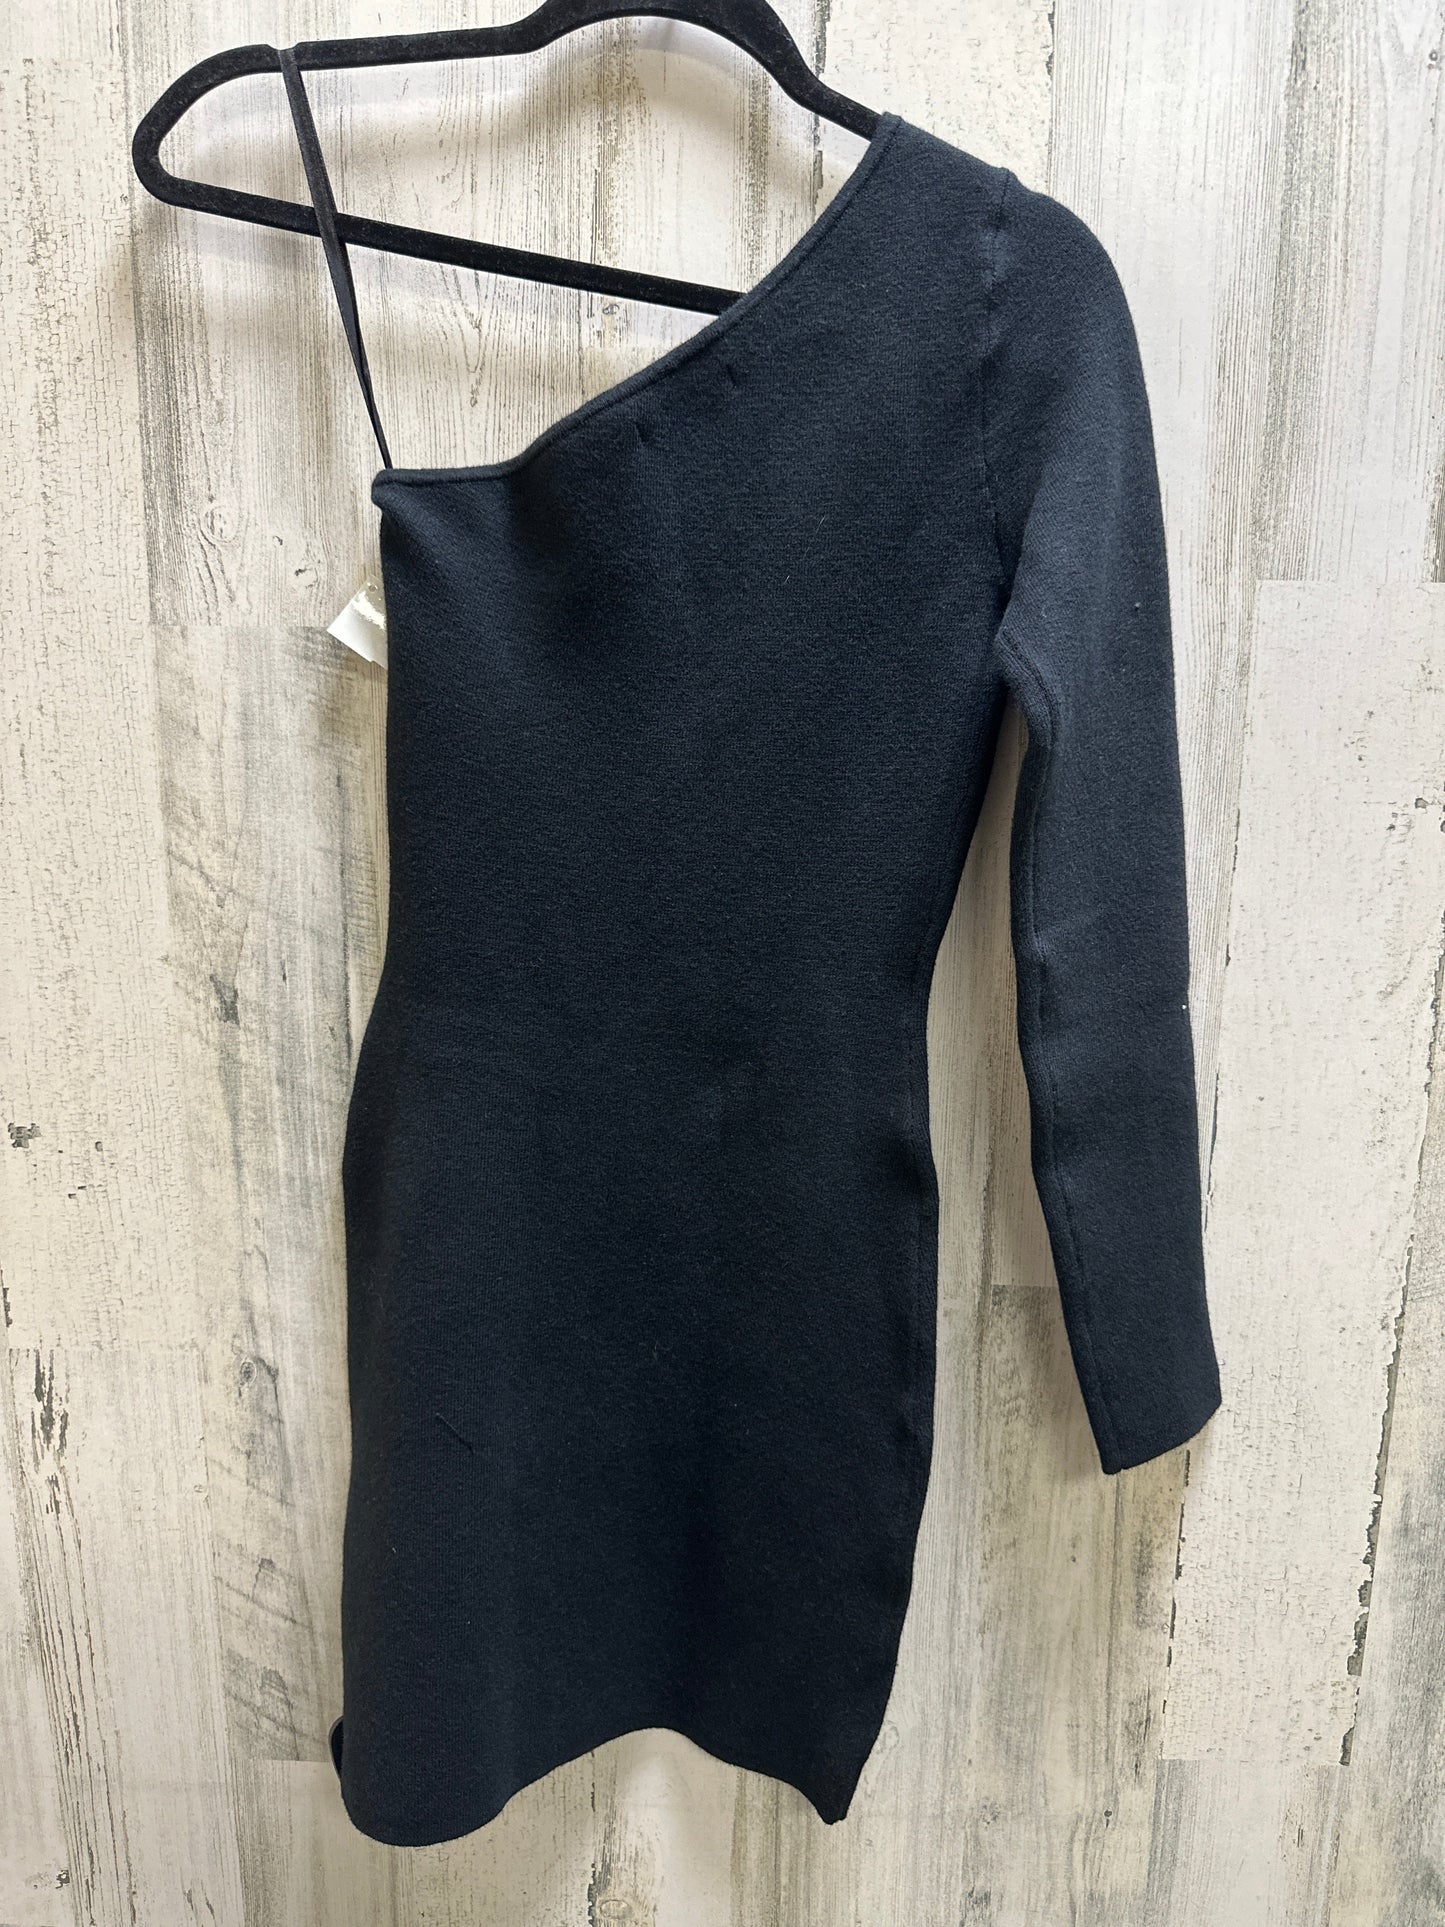 Black Dress Casual Midi Abercrombie And Fitch, Size Xs